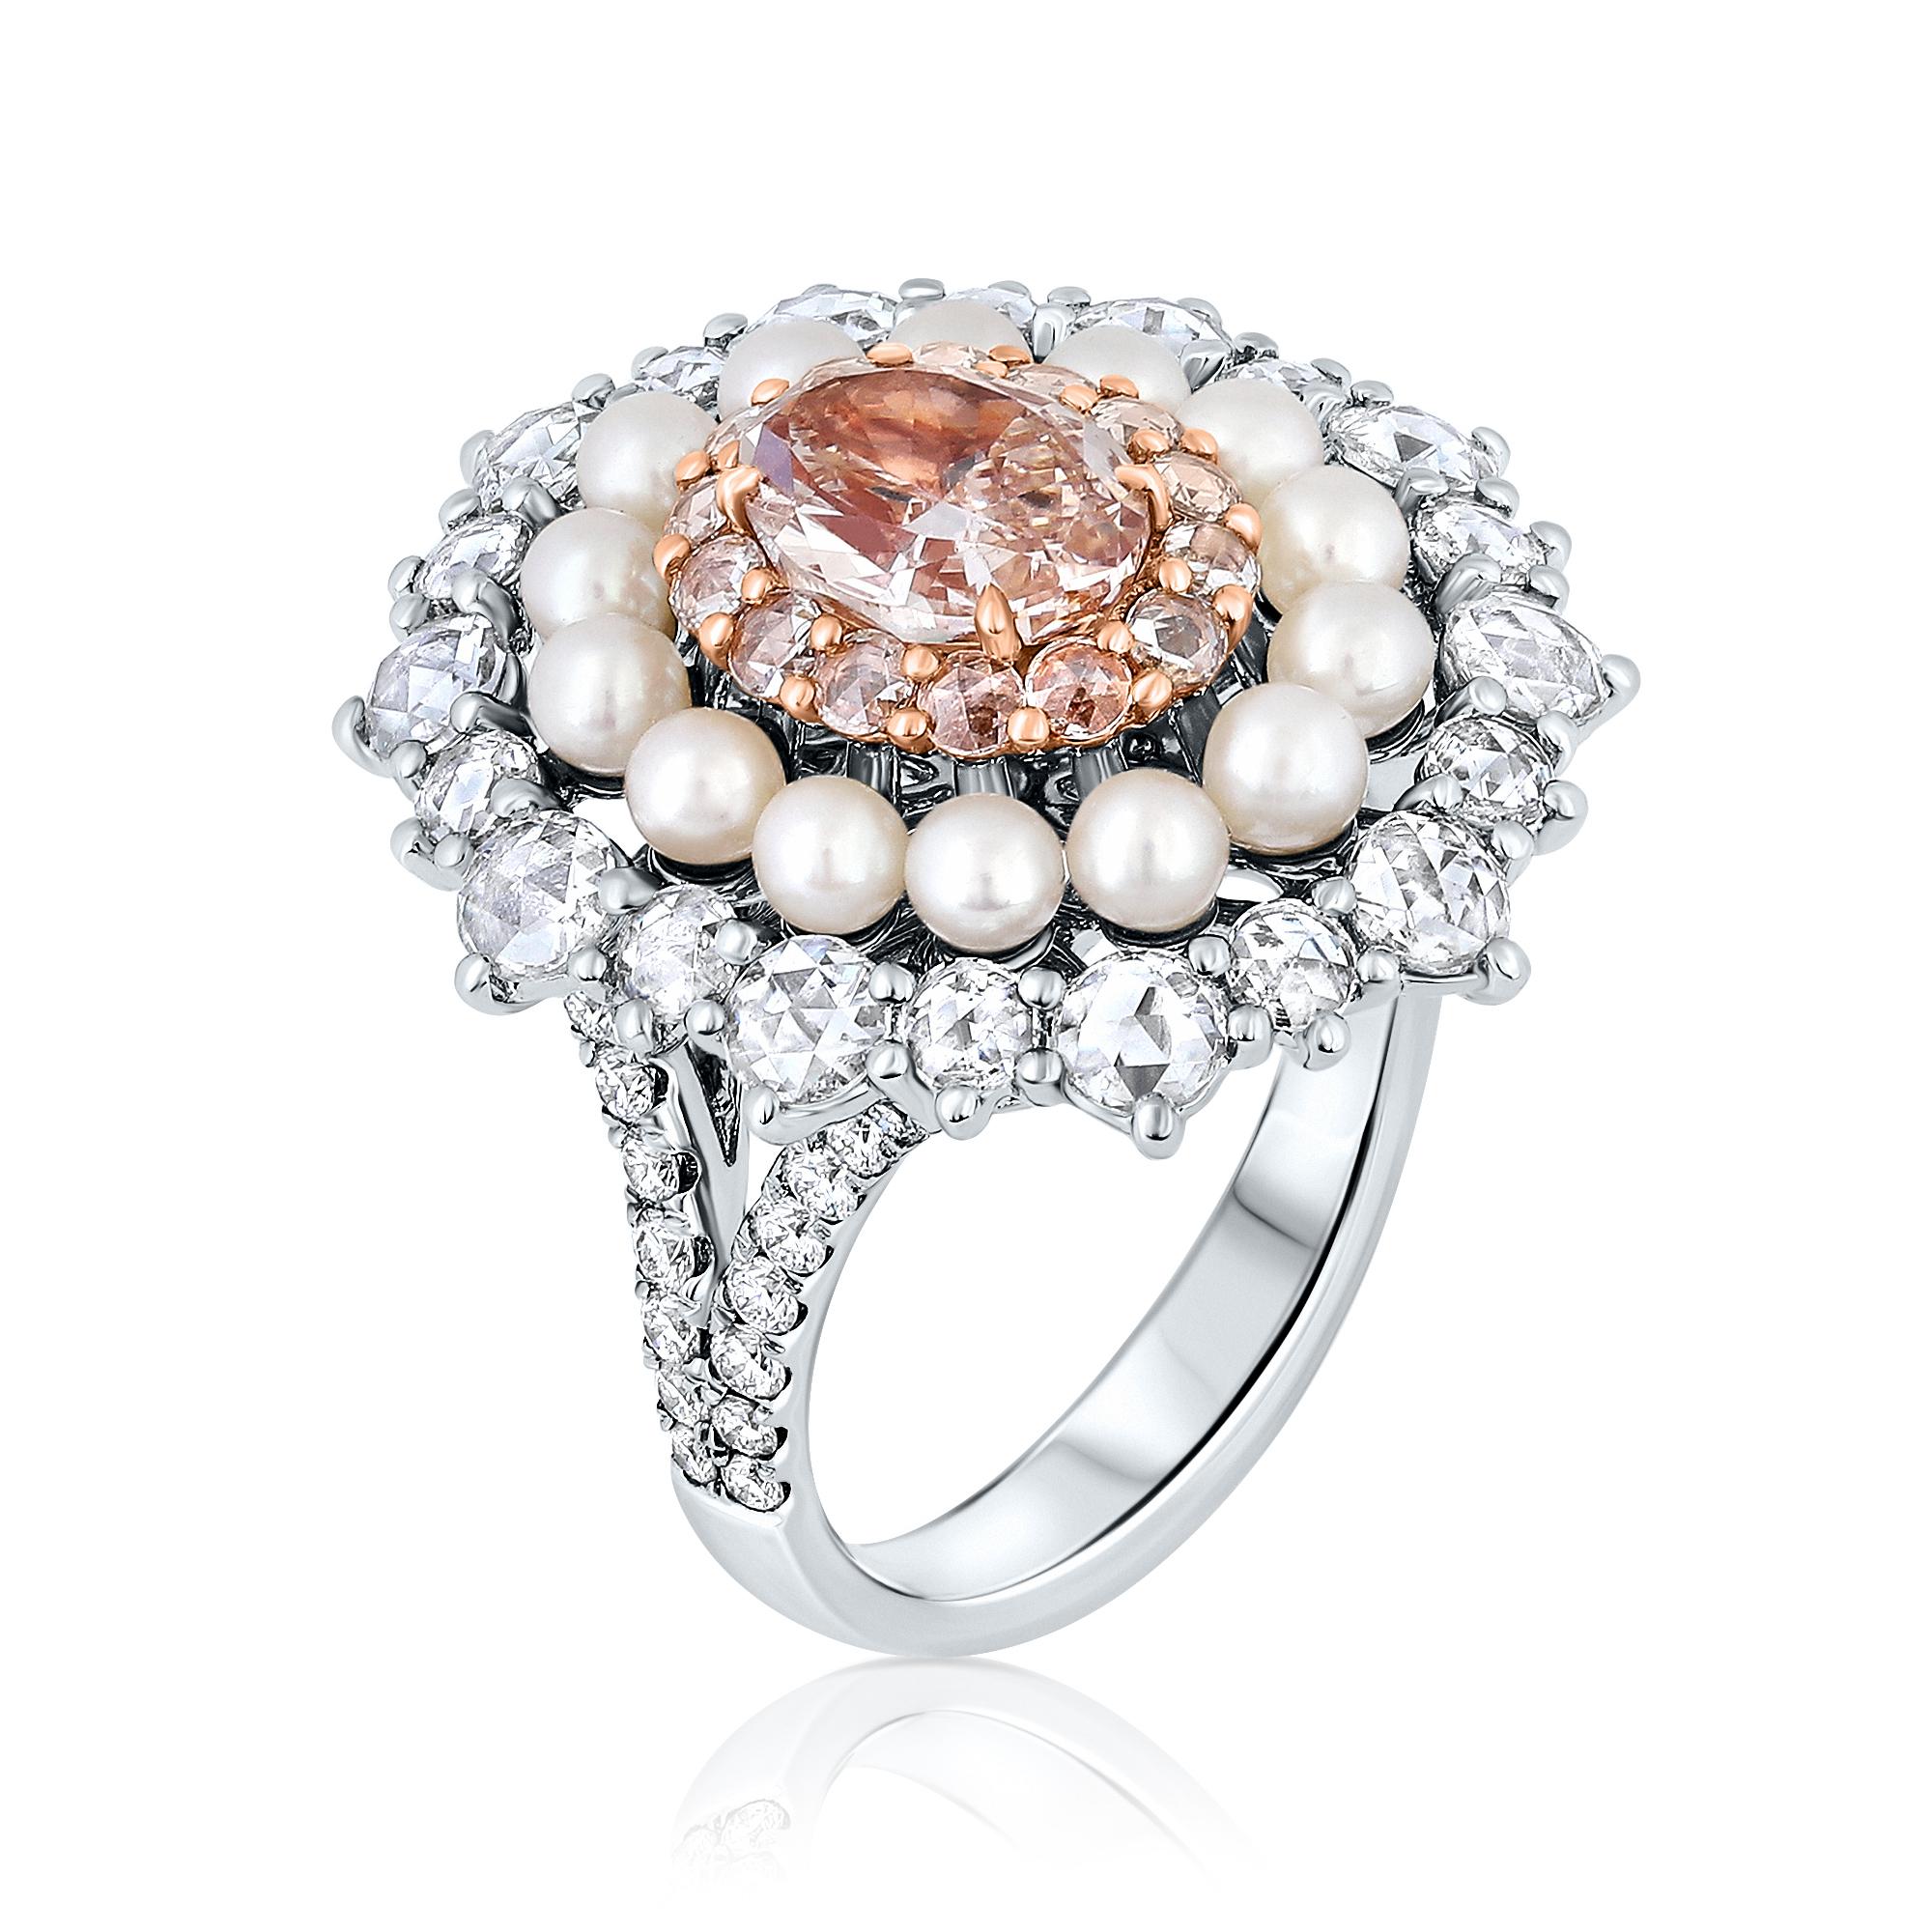 1.42 Carat Fancy Pink-Brown Diamond Cocktail Ring With Pearls, GIA Rerport. In New Condition For Sale In New York, NY